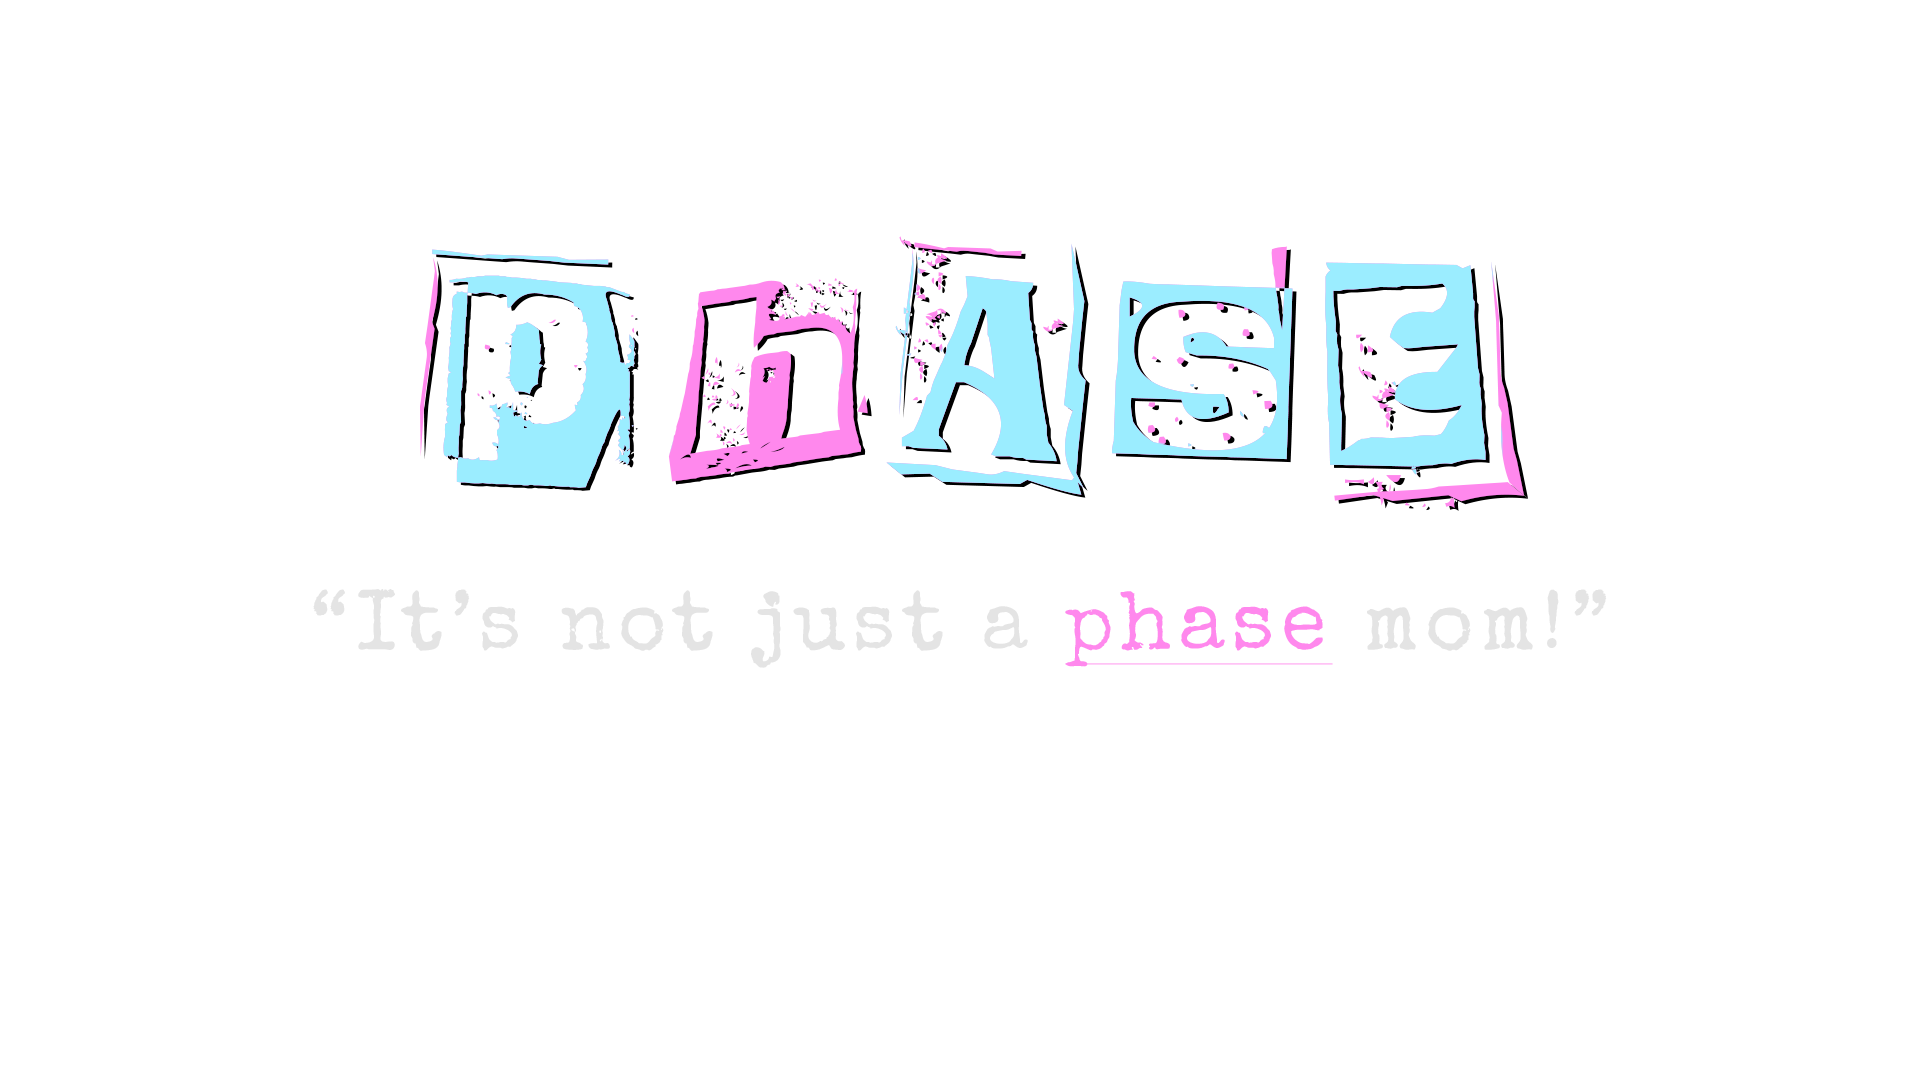 Phase: It's Not Just A Phase Mom!